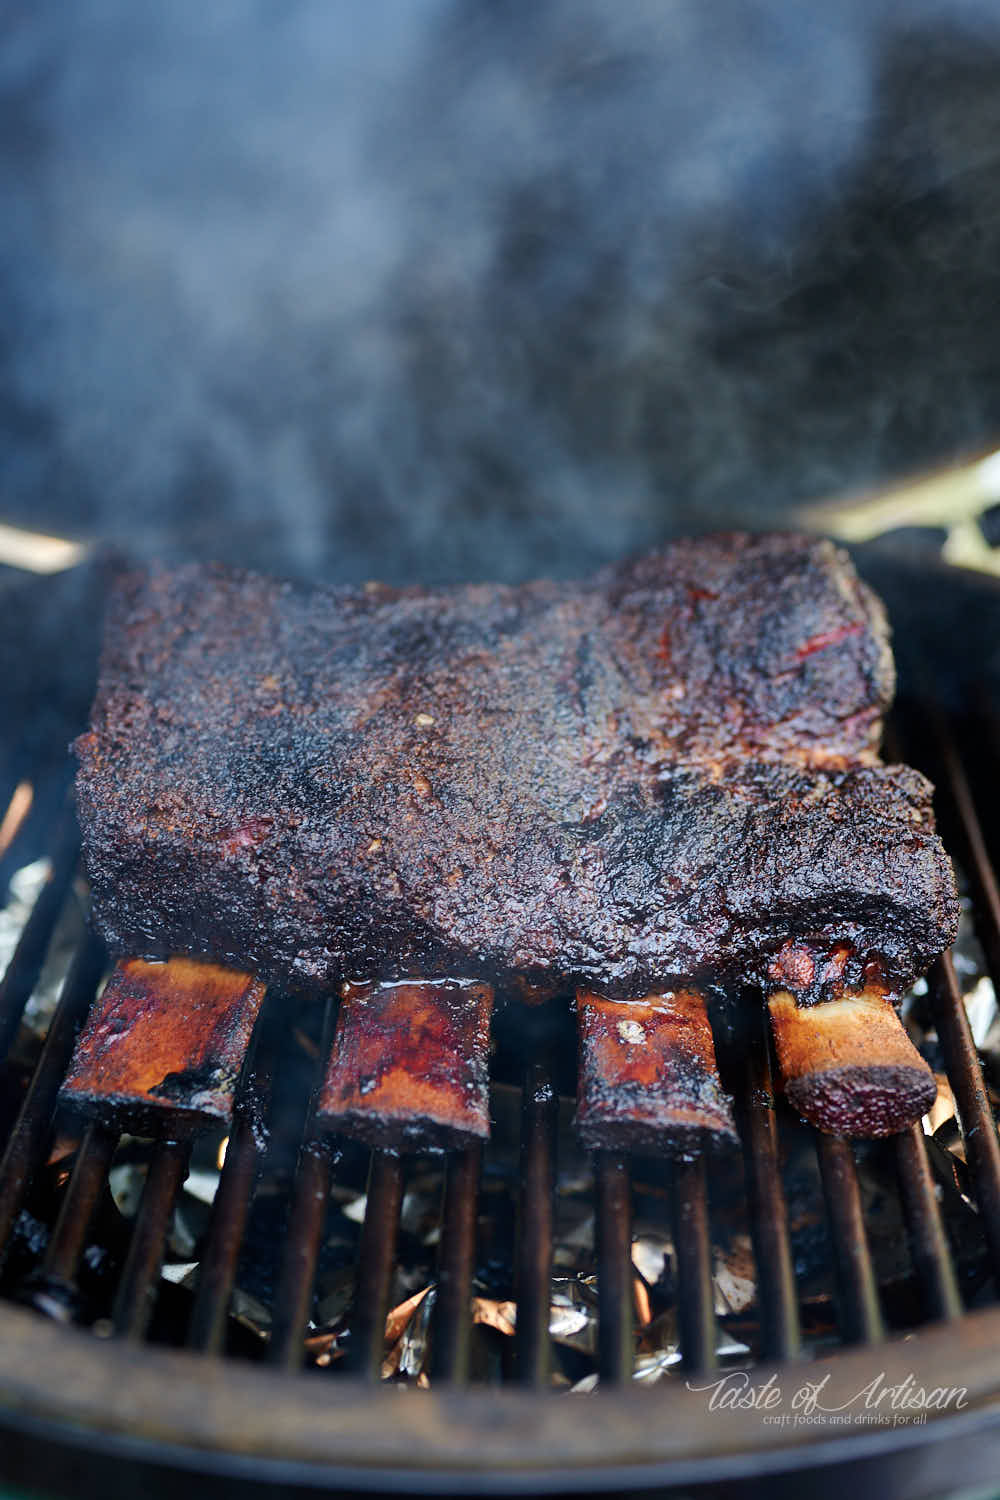 Beef short ribs on a smoker, smoke coming out.